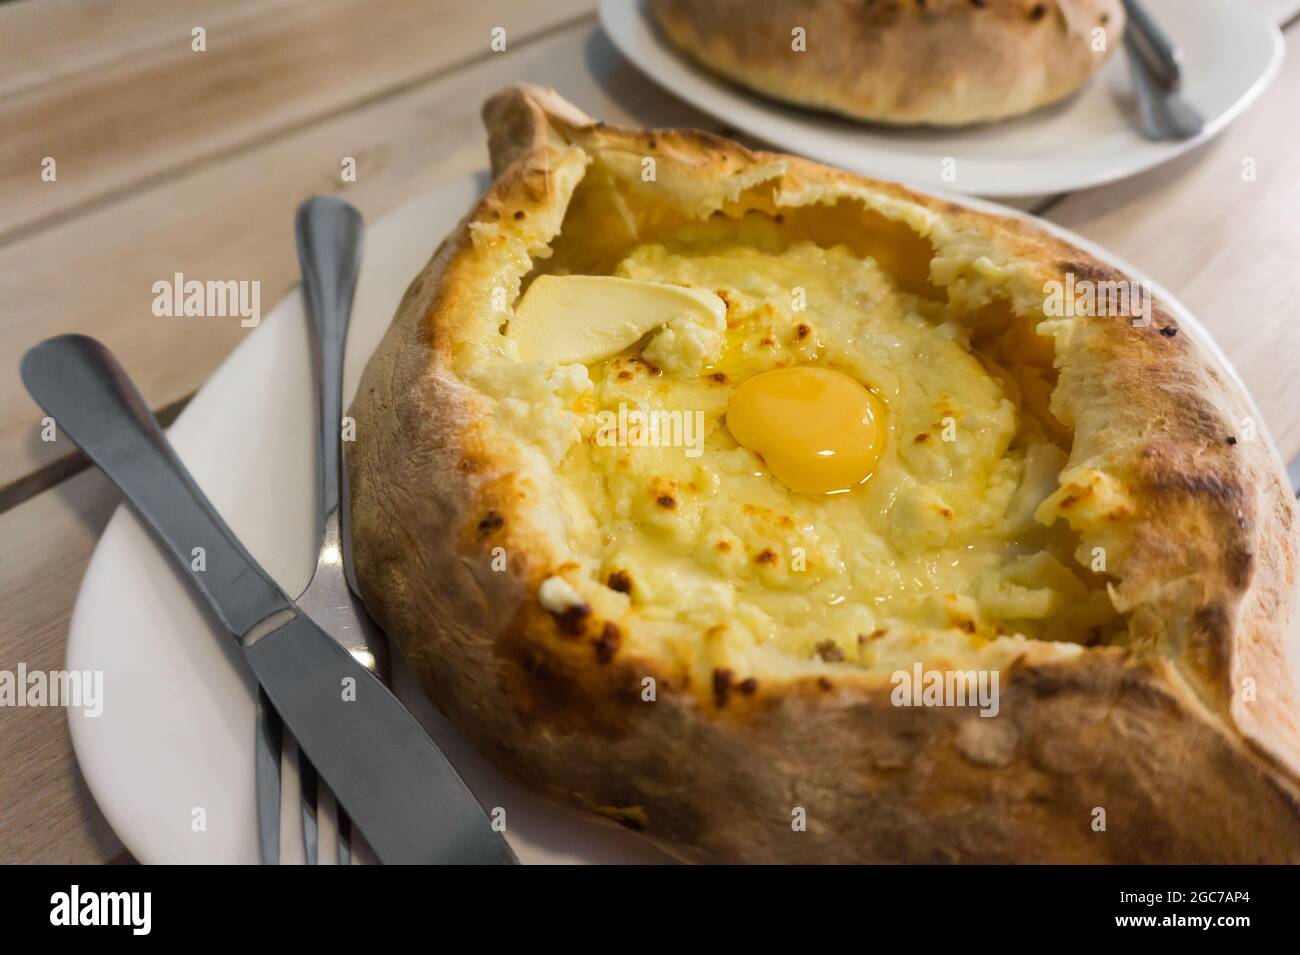 Khachapuri traditional Georgian Adjara cuisine meal on a plate in a restaurant. Baked bread with cheese and egg filling close-up Stock Photo